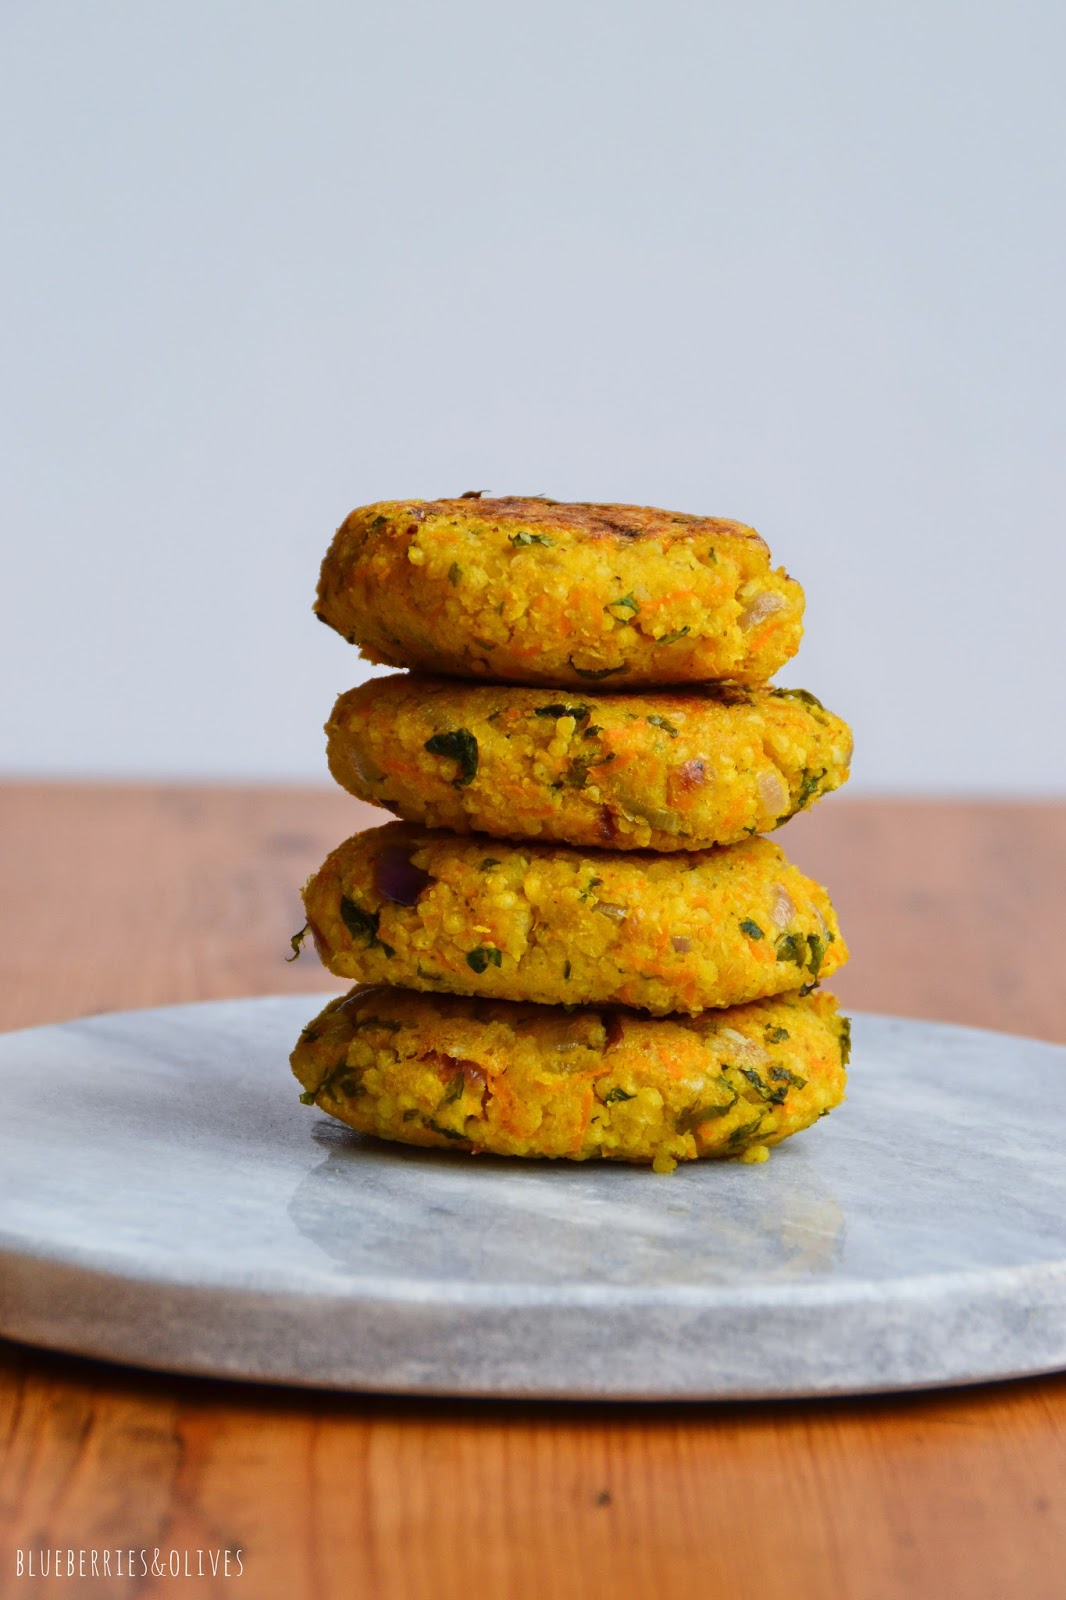 MILLET VEGGIE BURGERS WITH CURRY AND A YOGURT SAUCE (GF, LF, VGT)